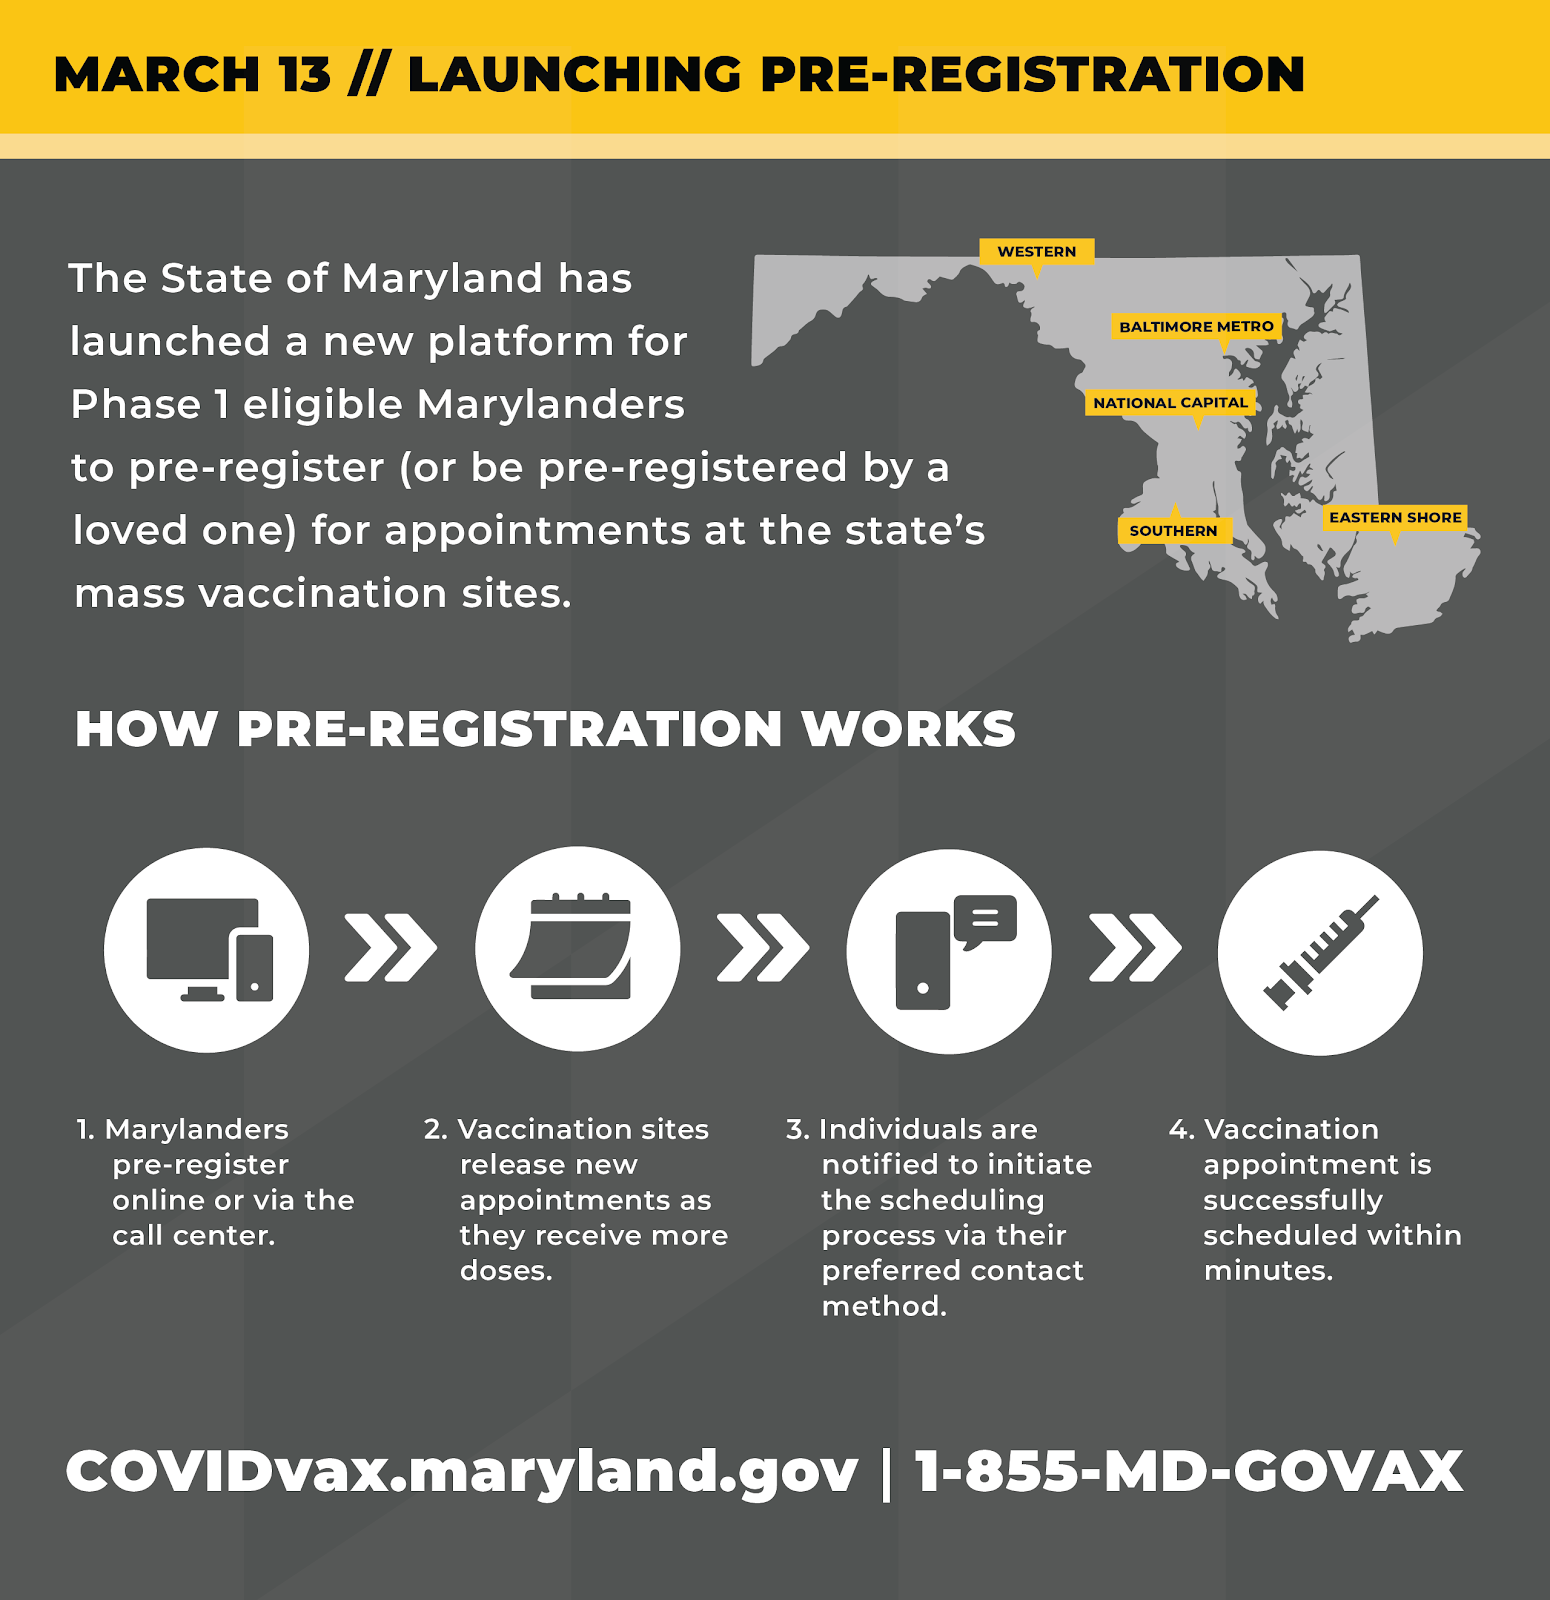 Graphic shows pre-registration process. Can be done online or via call center. Individuals notified of available appointments.